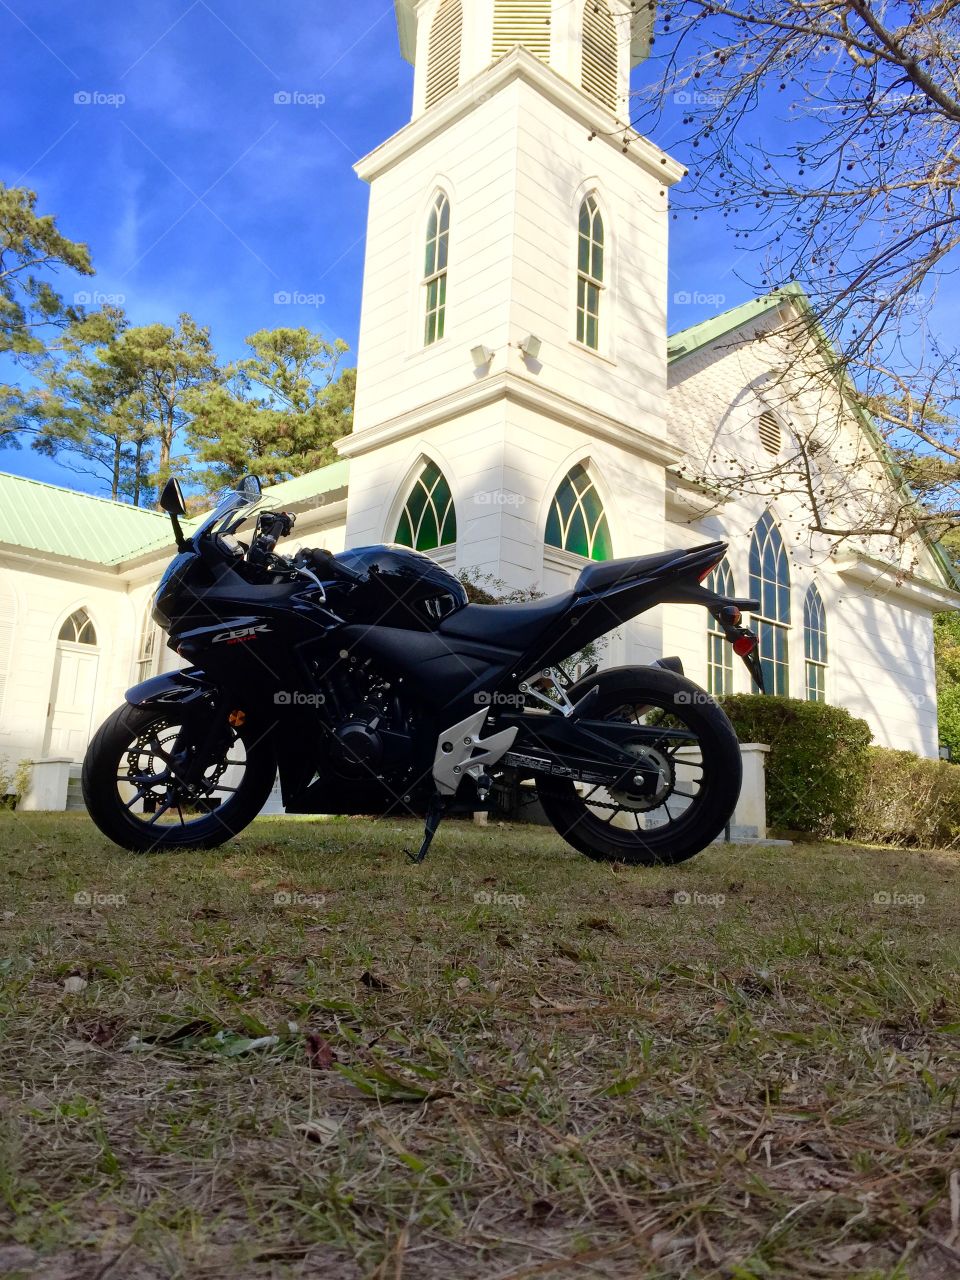 Honda CBR 500. Motorcycle parked in front of a church 